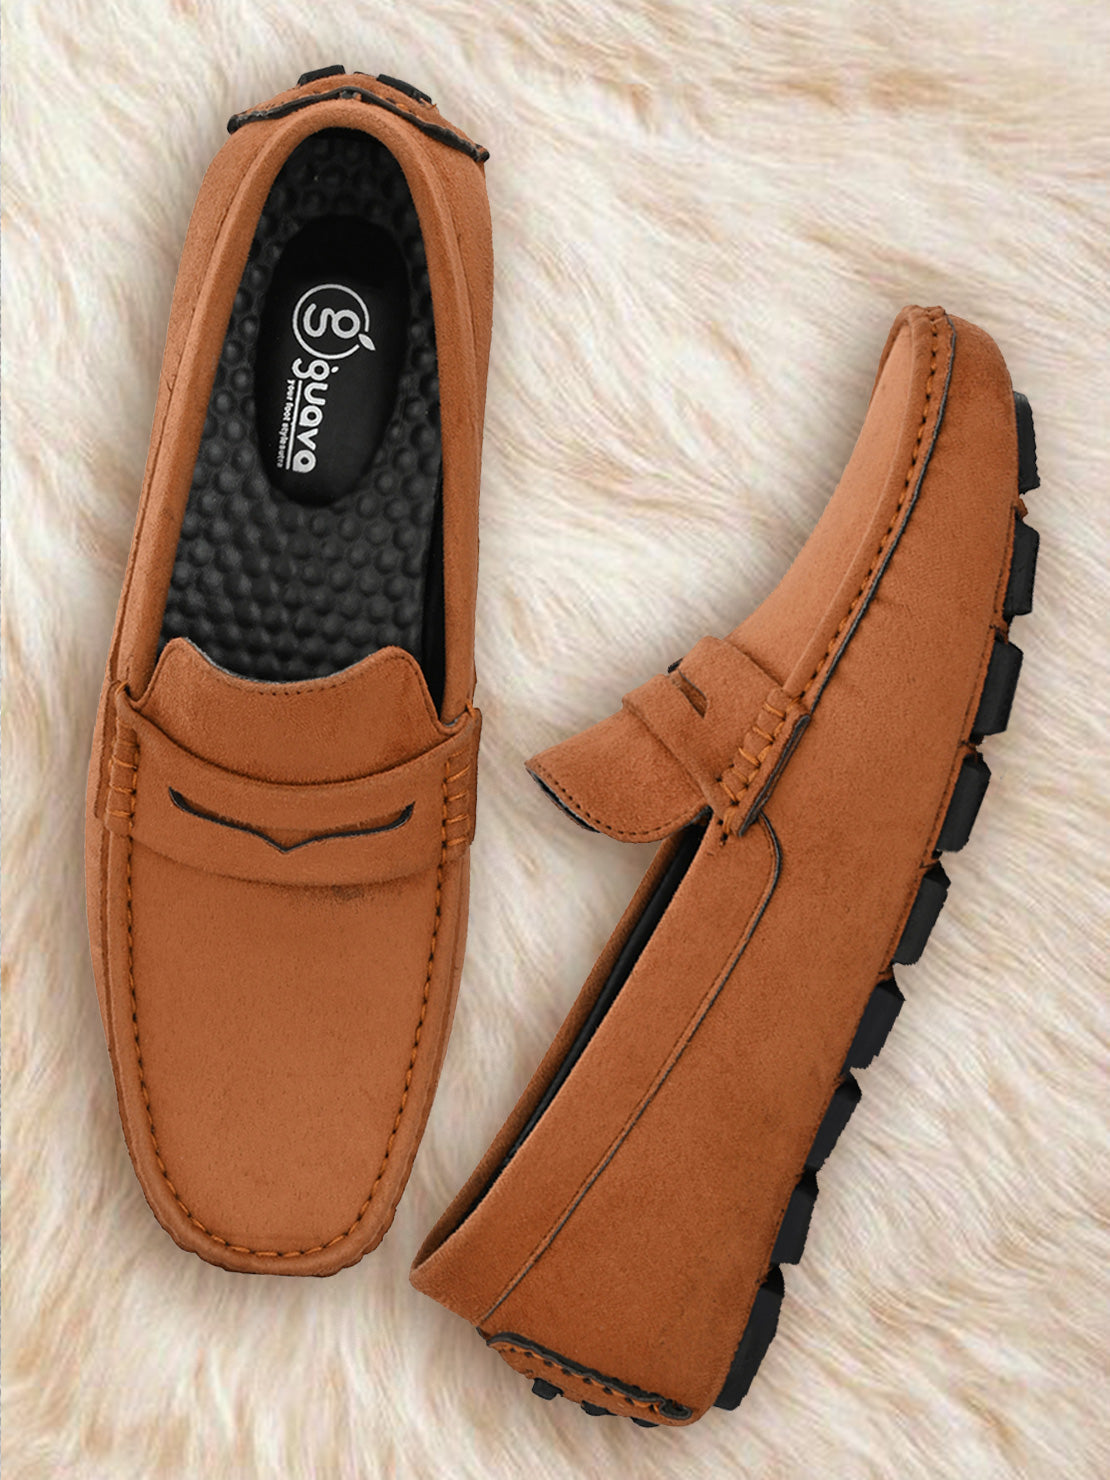 Guava Men's Tan Casual Slip On Driving Loafers (GV15JA753)